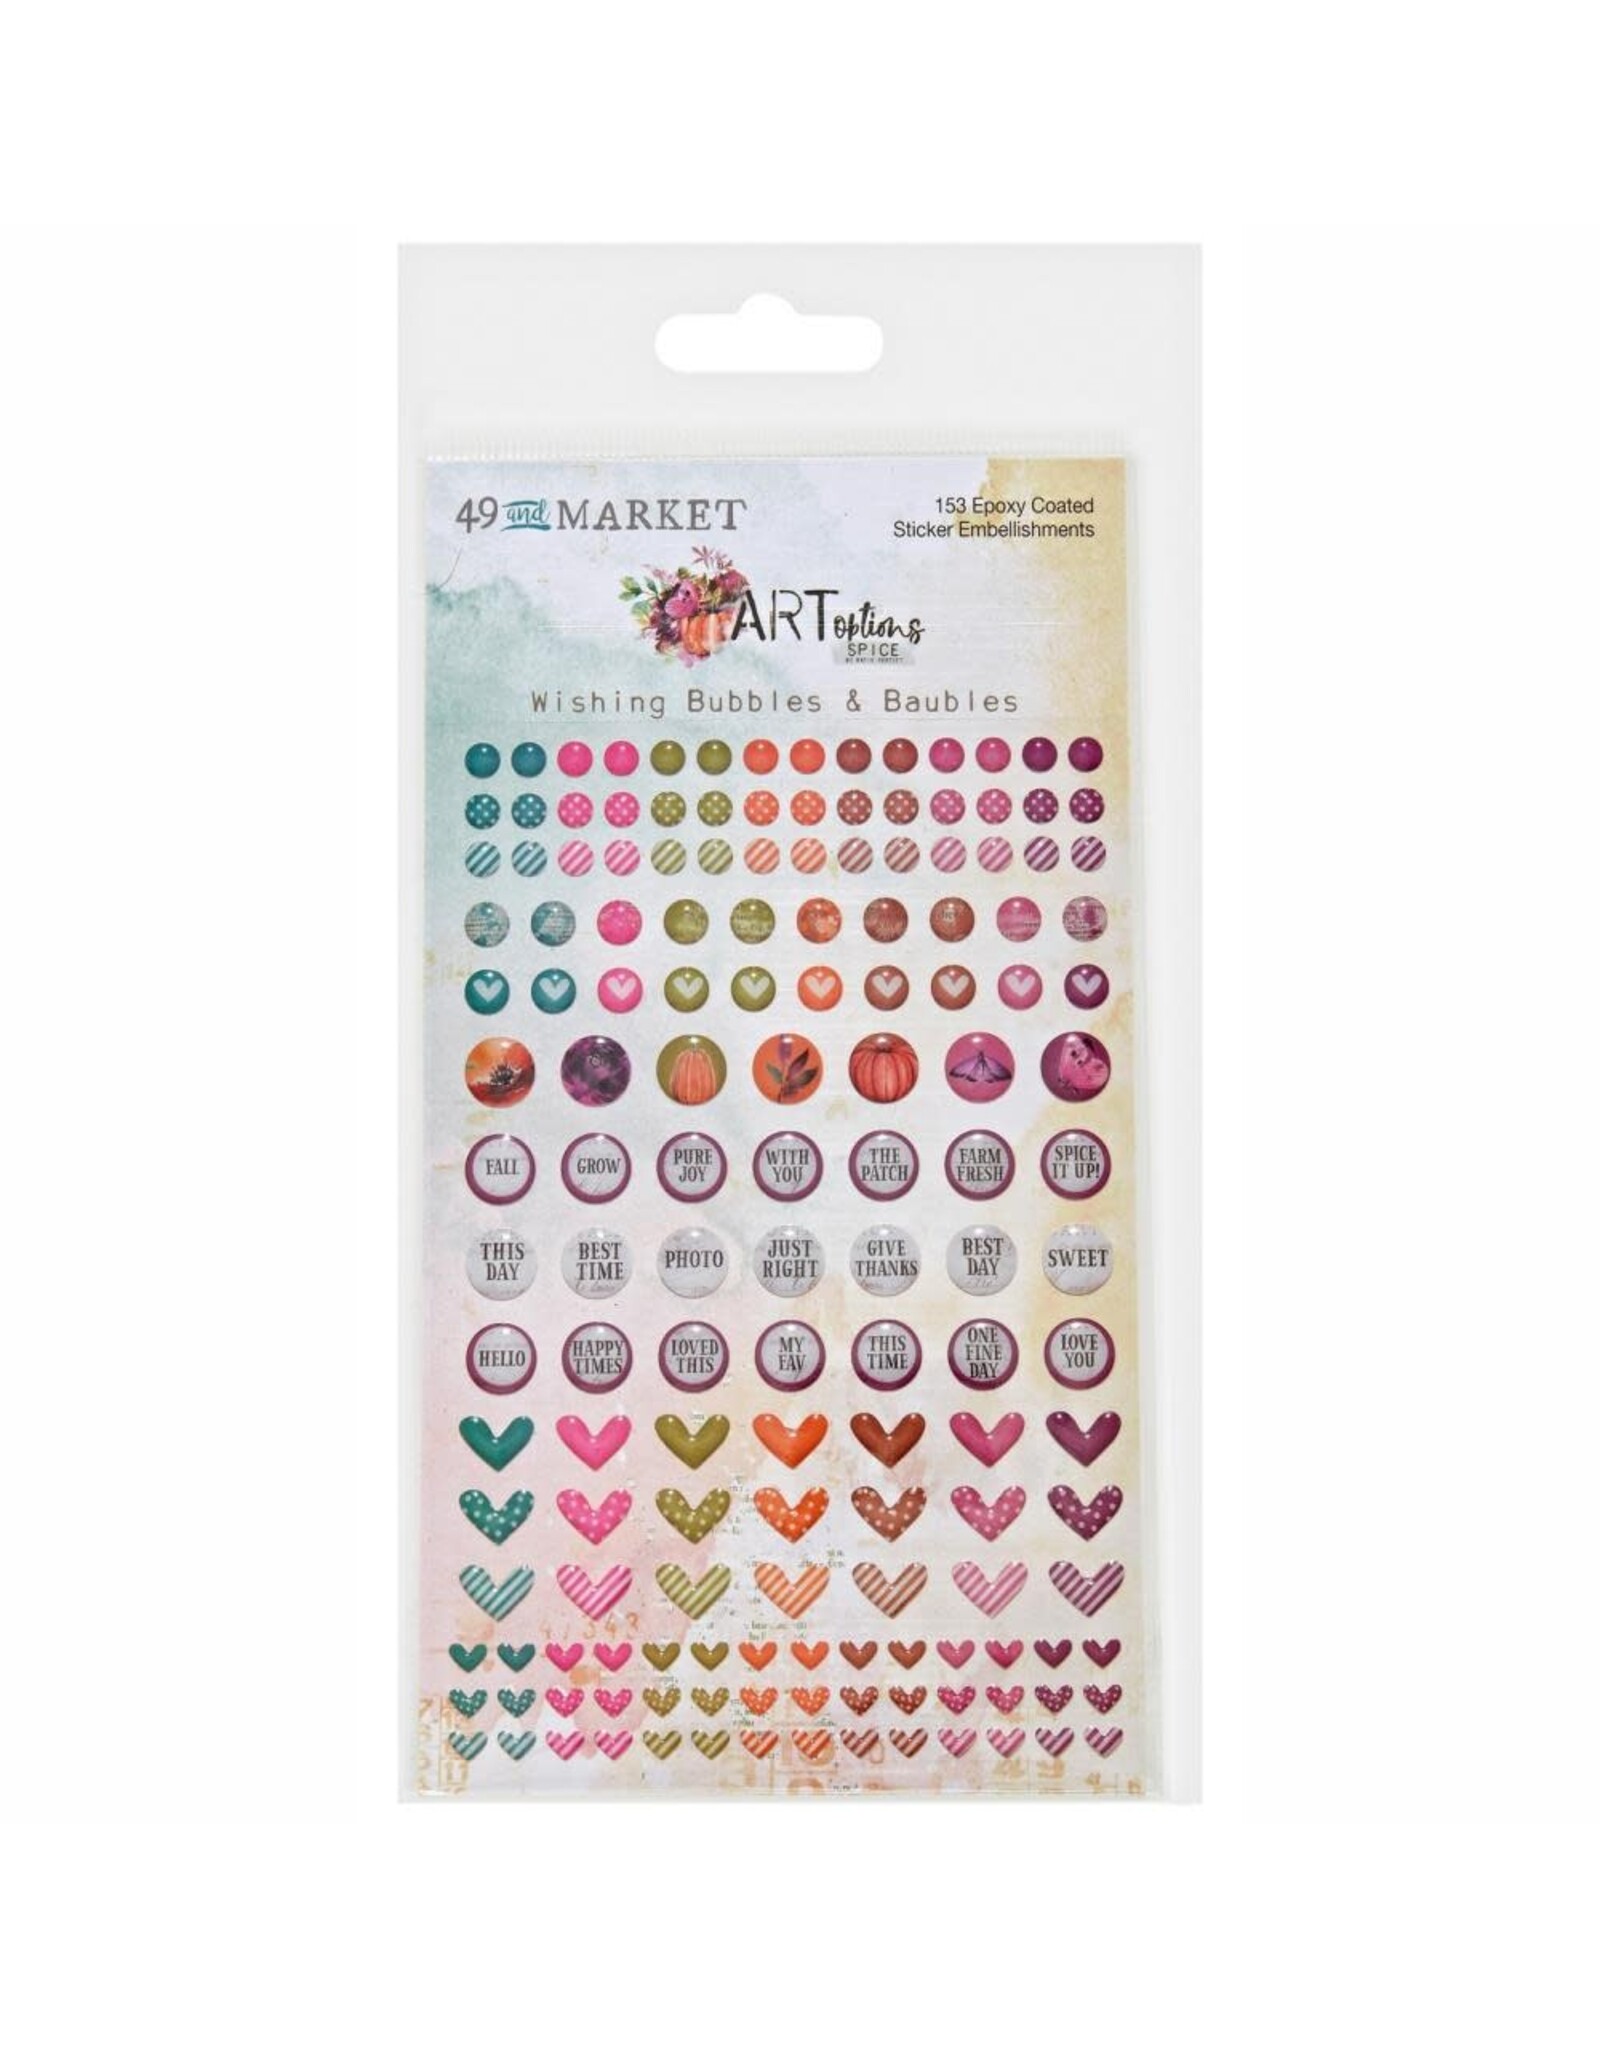 49 AND MARKET 49 AND MARKET ARTOPTIONS SPICE WISHING BUBBLES & BAUBLES 153/PK